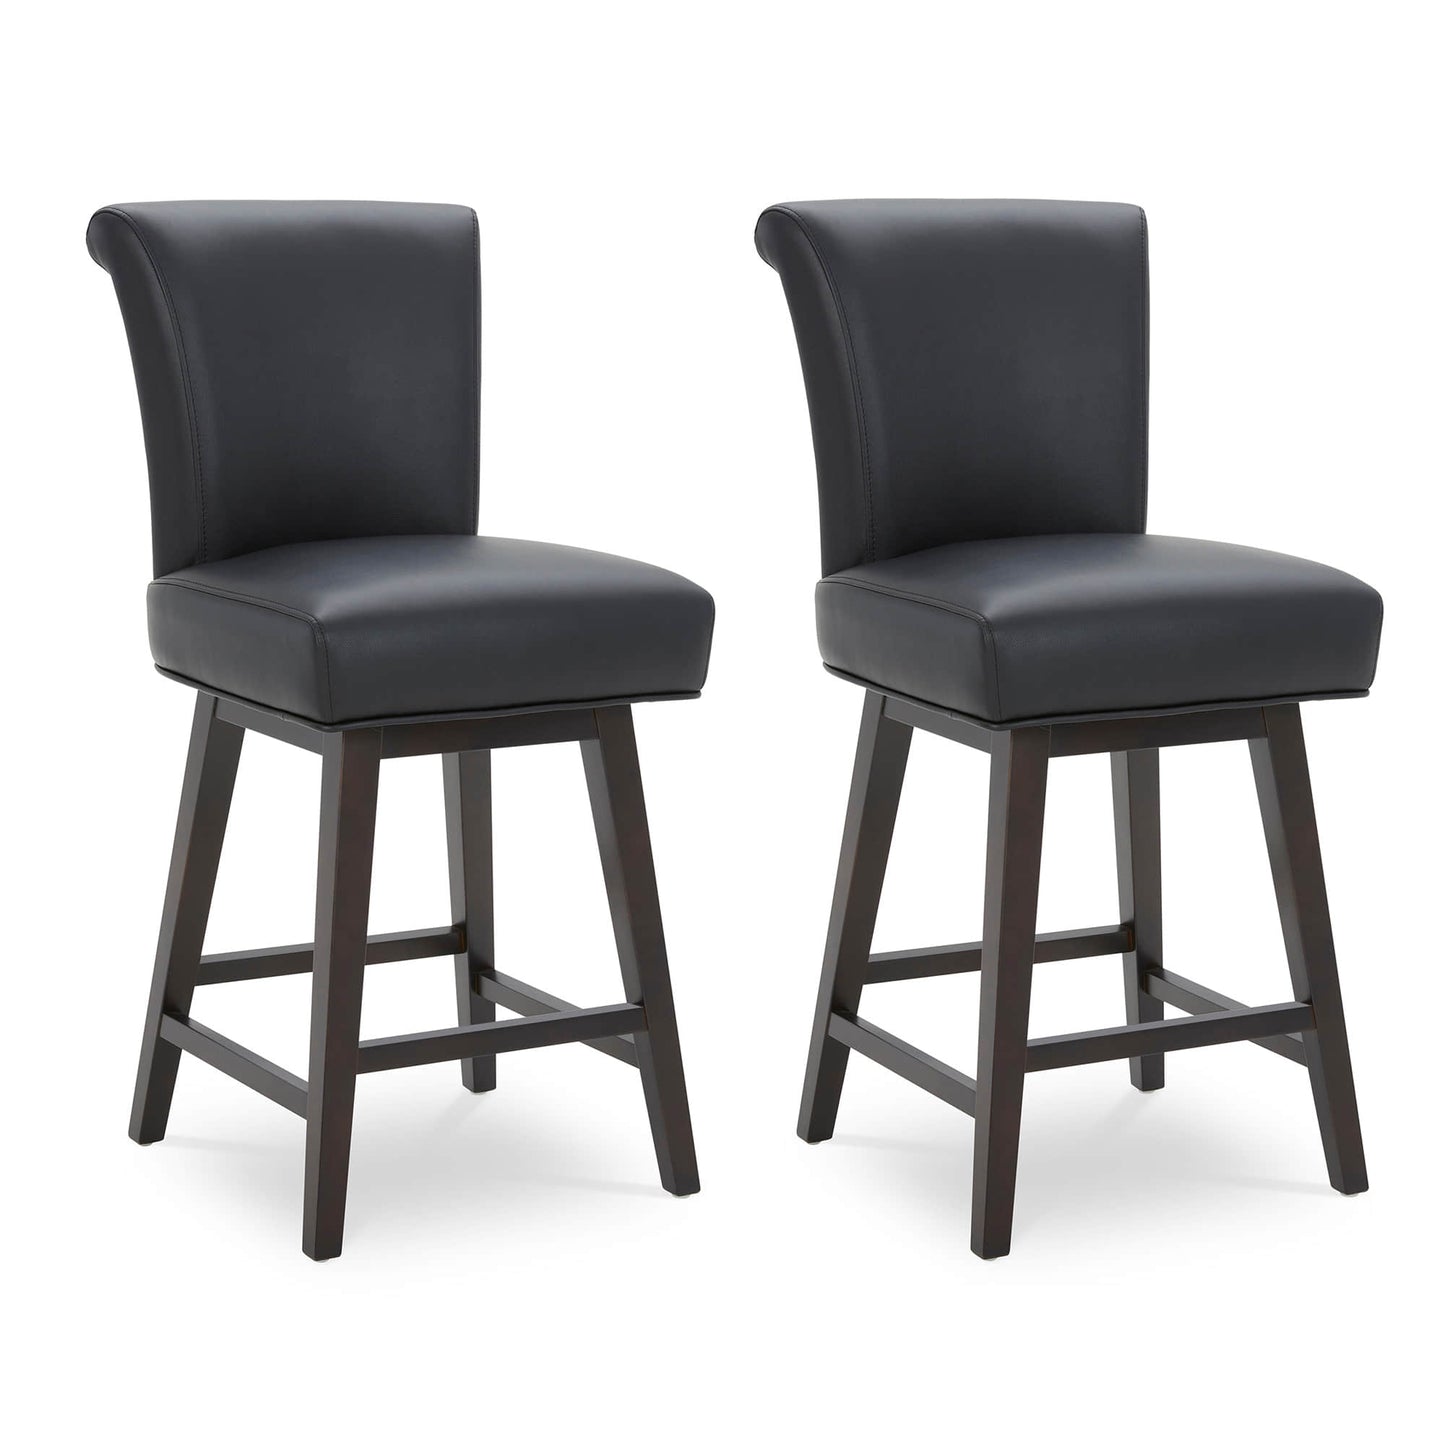 CHITA LIVING-Alina Modern Swivel Counter Stool-Counter Stools-Faux Leather-Black-2-Pack